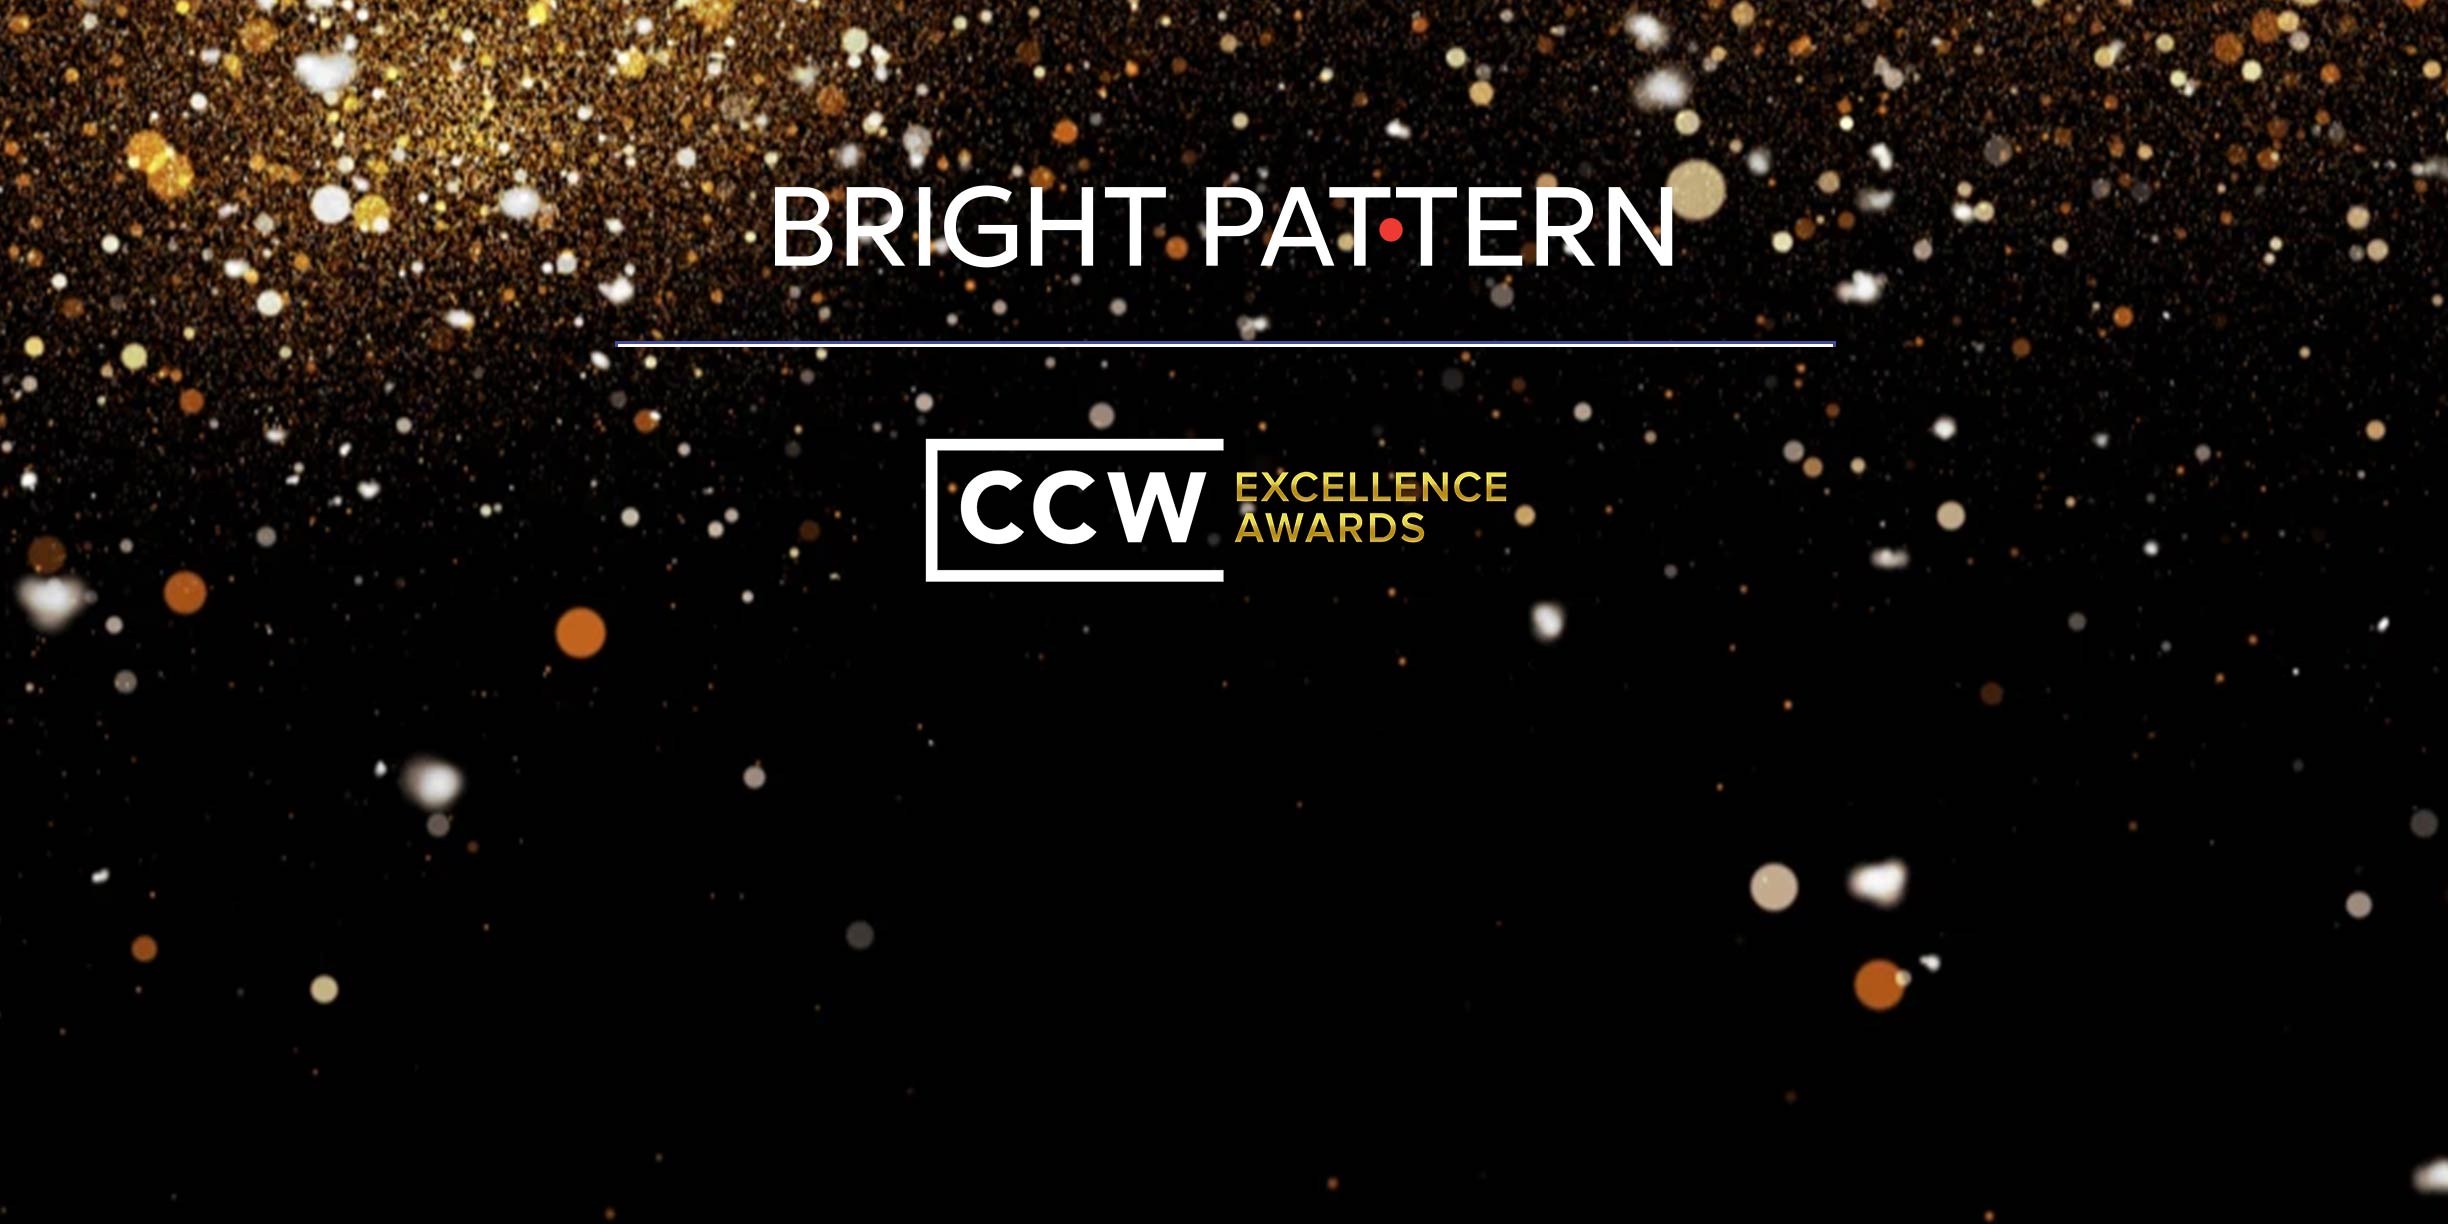 Bright Pattern Nominated as Finalist for “Cloud-Based CX Solution of the Year” and “Disruptive Technology of the Year” at World’s Largest Contact Center Event